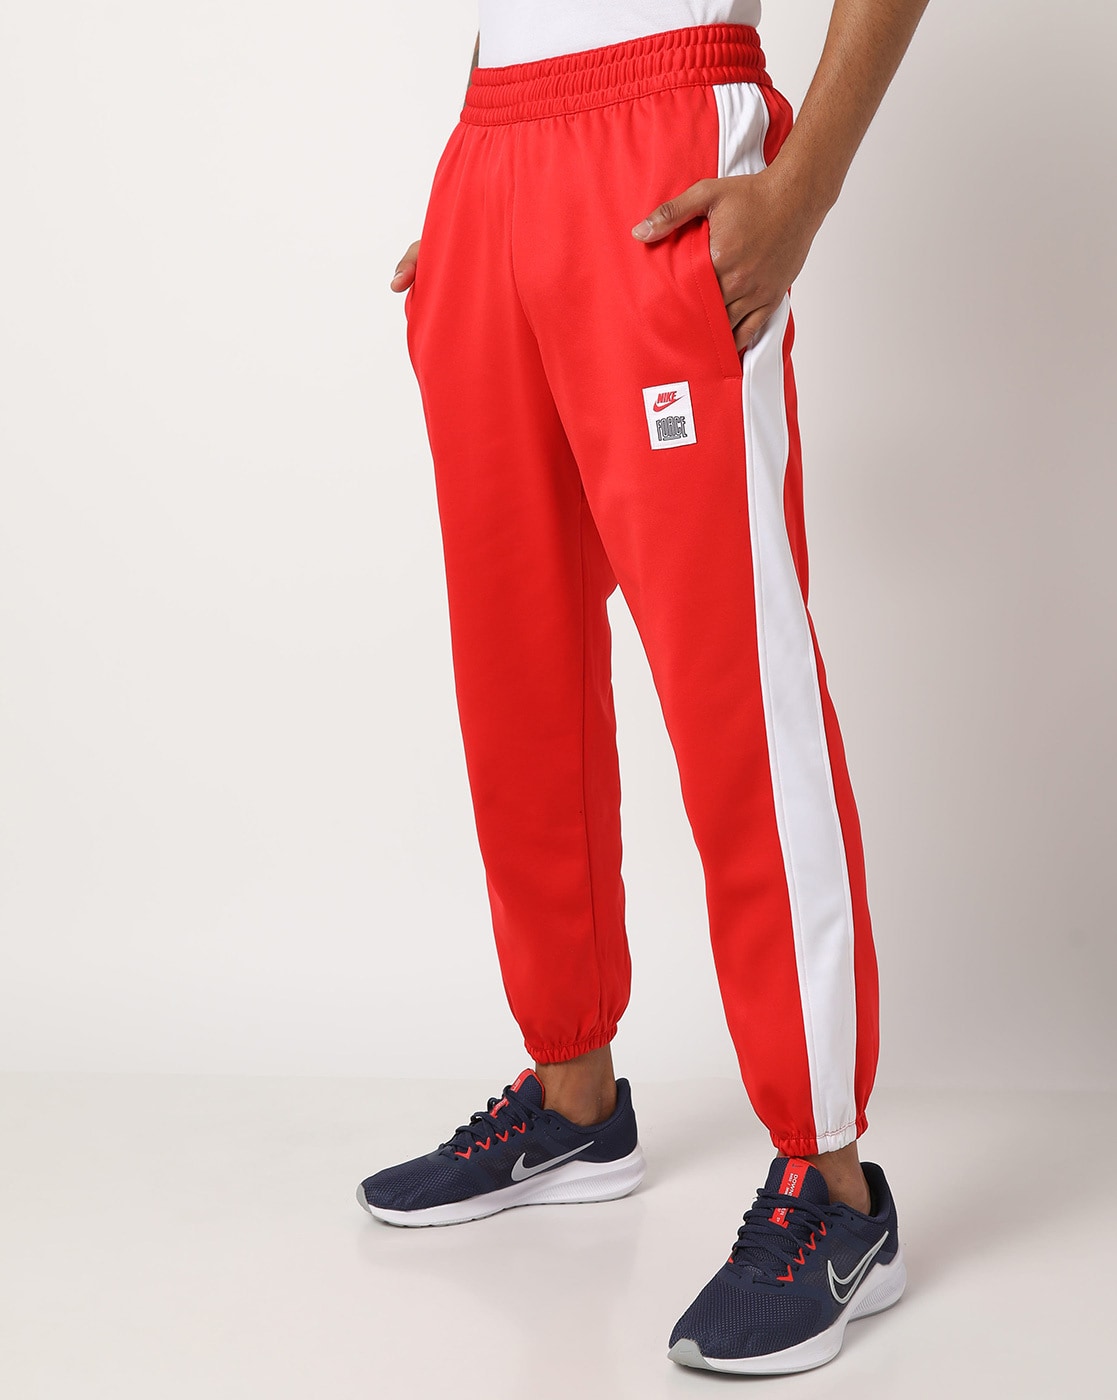 Nike NSW Loose Fit Track Pants Mens Pants Red AR3142-657 – Shoe Palace